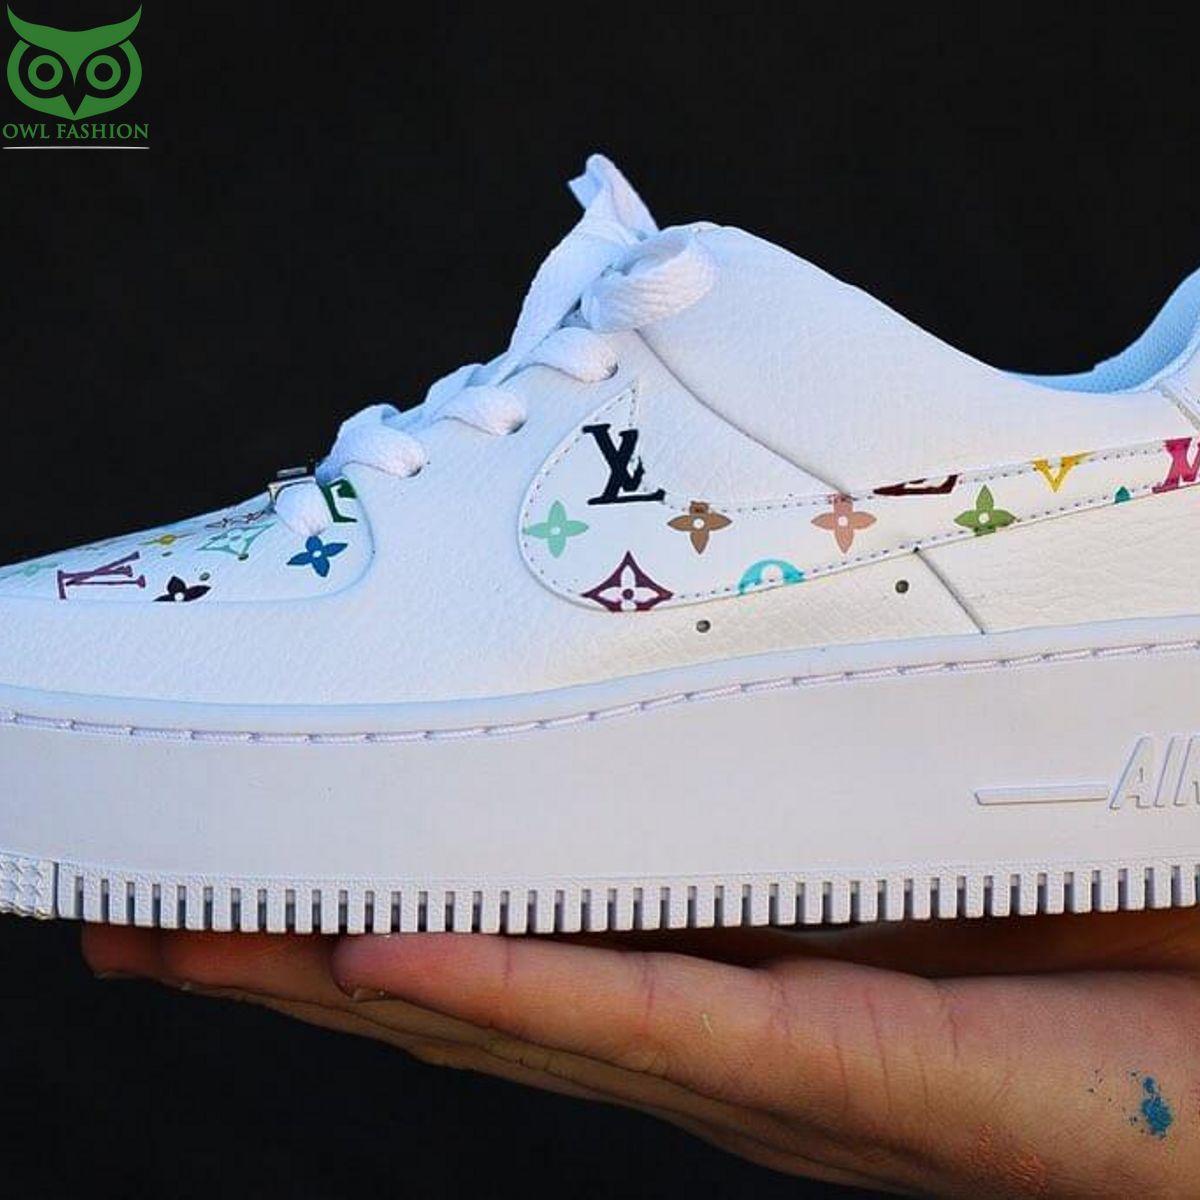 NEW FASHION] Louis Vuitton Black White Air Jordan 11 Shoes Hot 2023 LV  Sneakers Gifts For